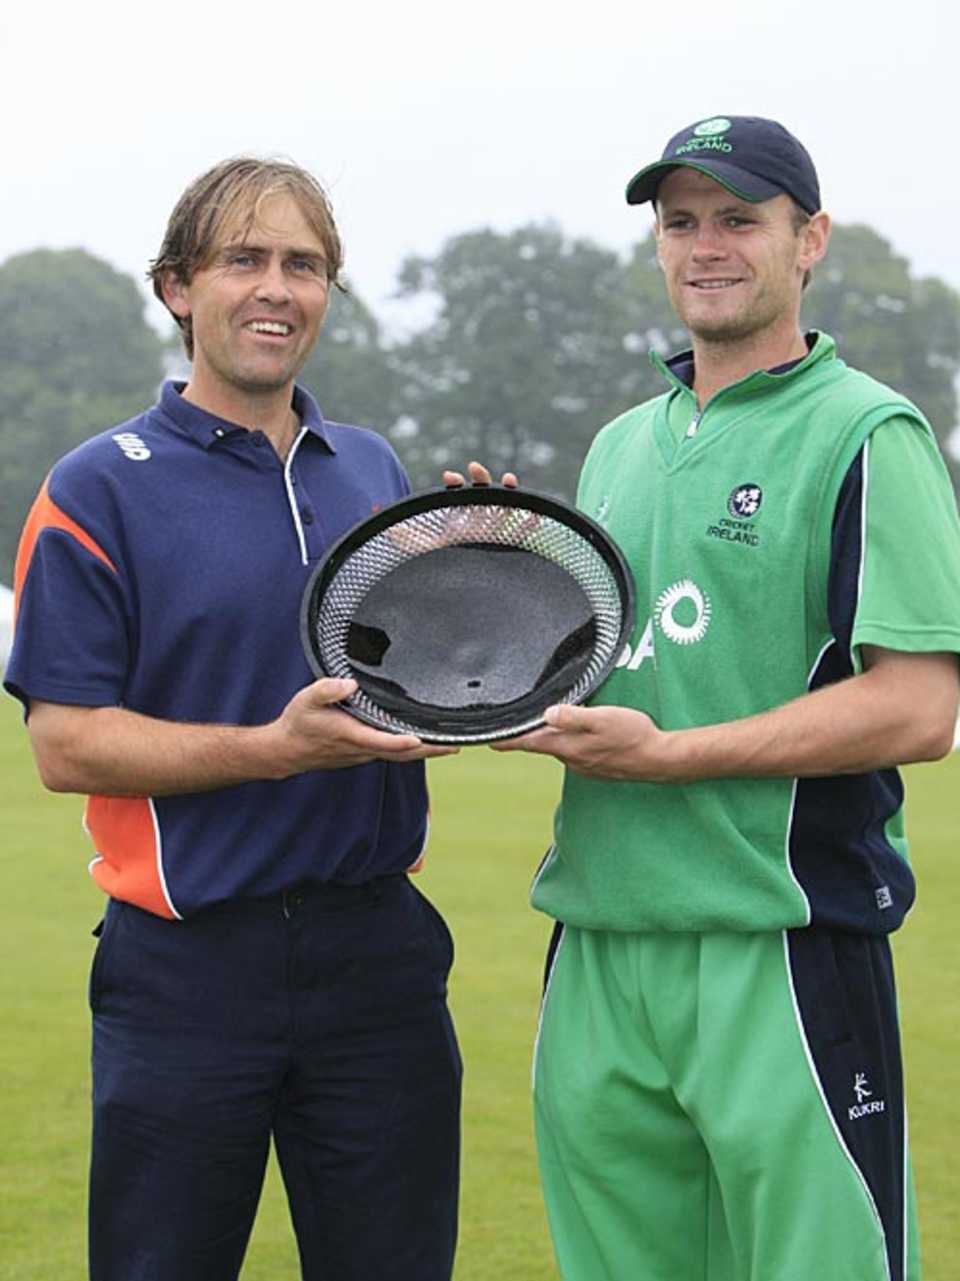 Netherlands captain Jeroen Smits and Ireland captain William Porterfield pose for the cameras